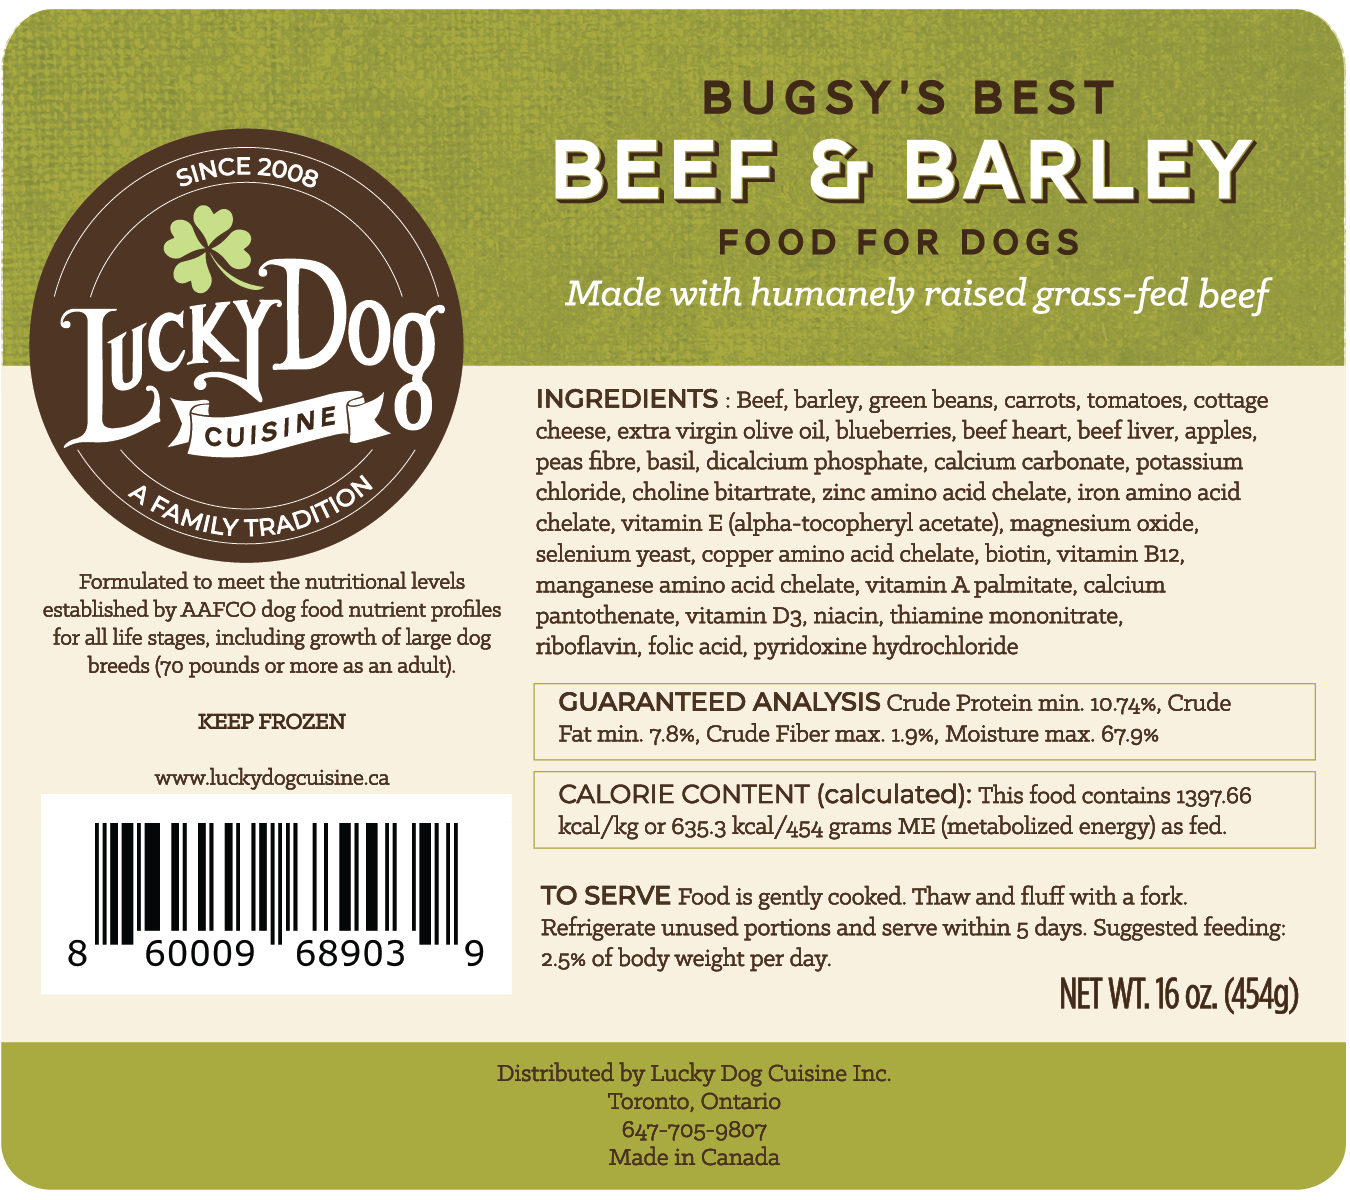 Beef and barley label with ingredient list and guaranteed analysis